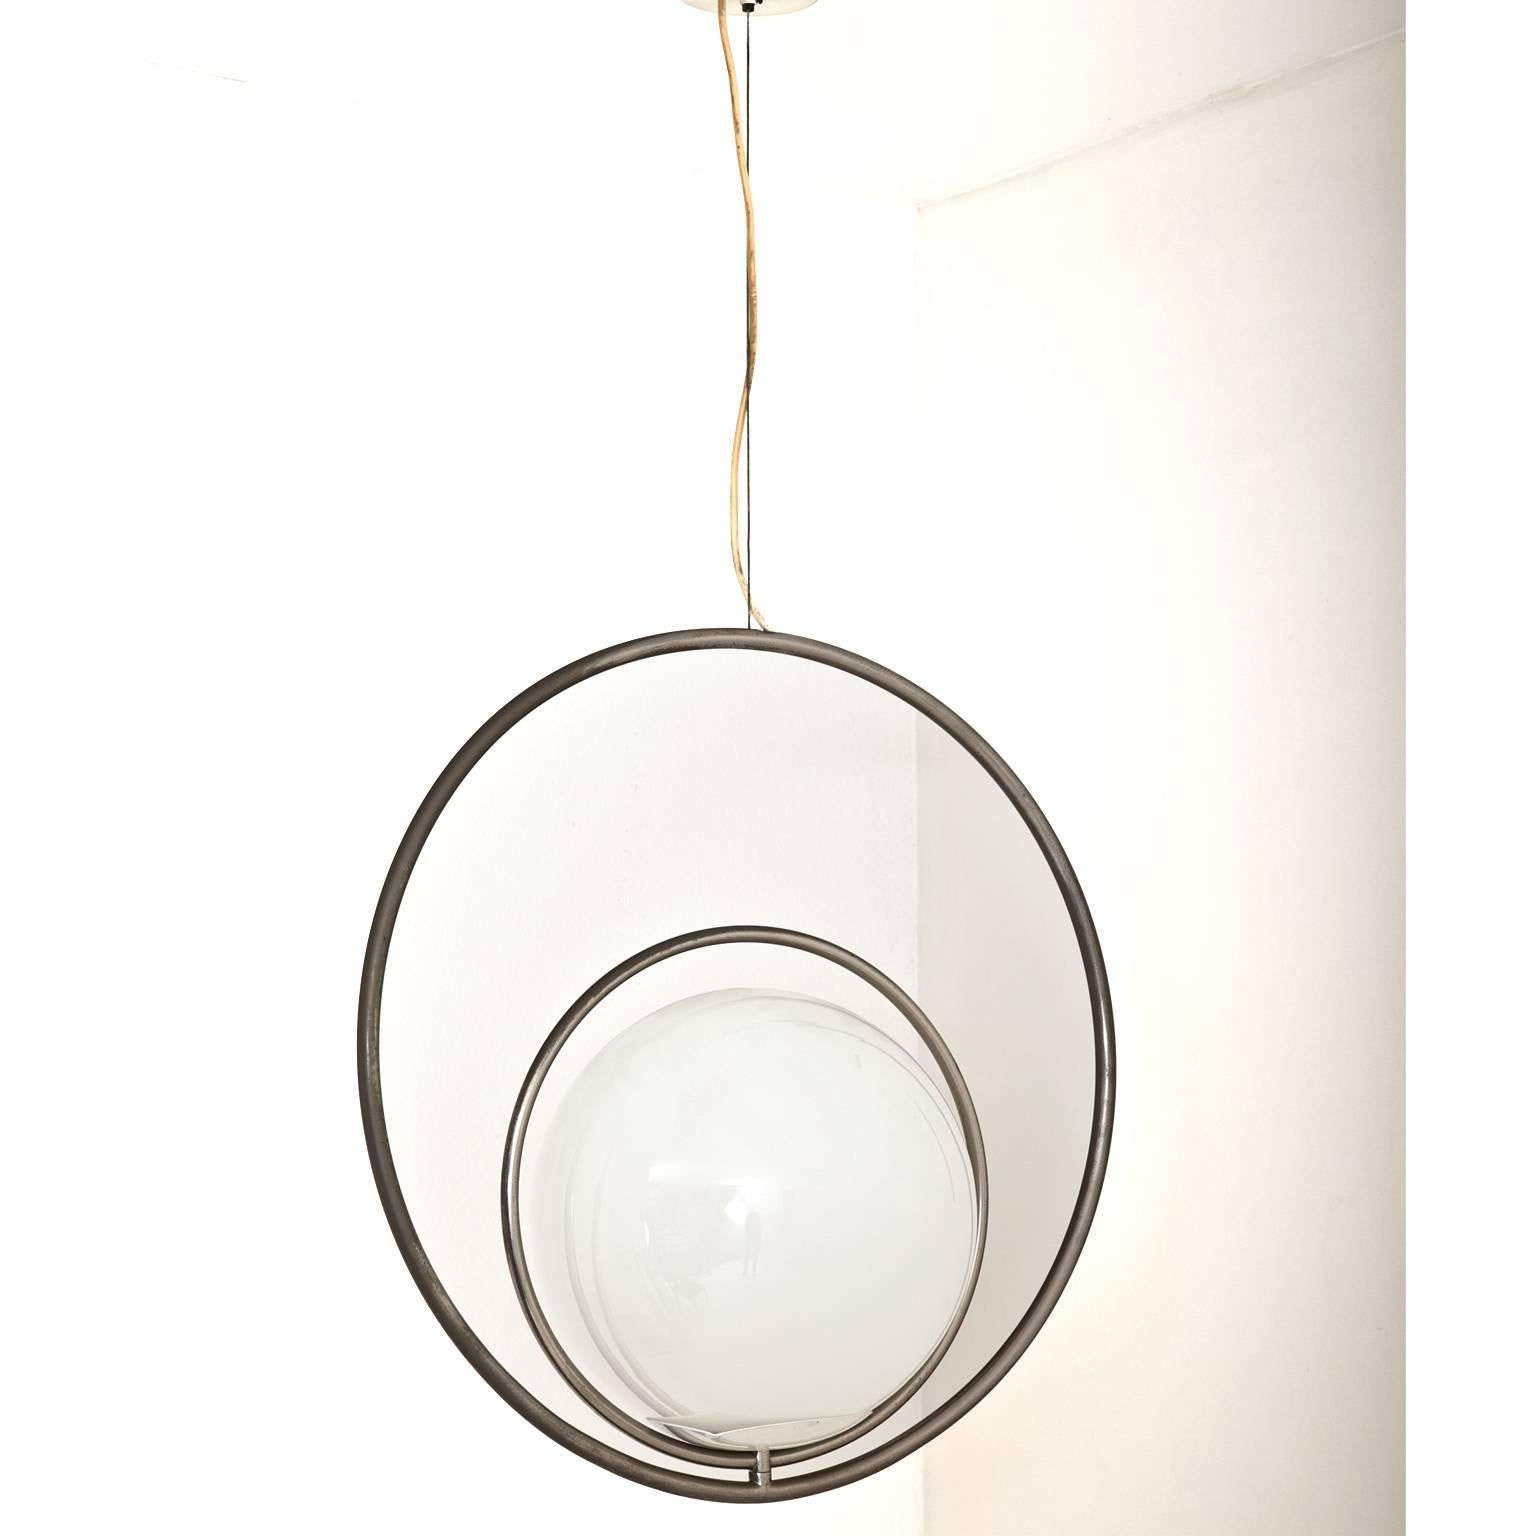 Globe-shaped pendant lamp out of opaque glass with two chromed rings as mounting. The rings are rotatable so the lamp can be hung up in multiple ways.